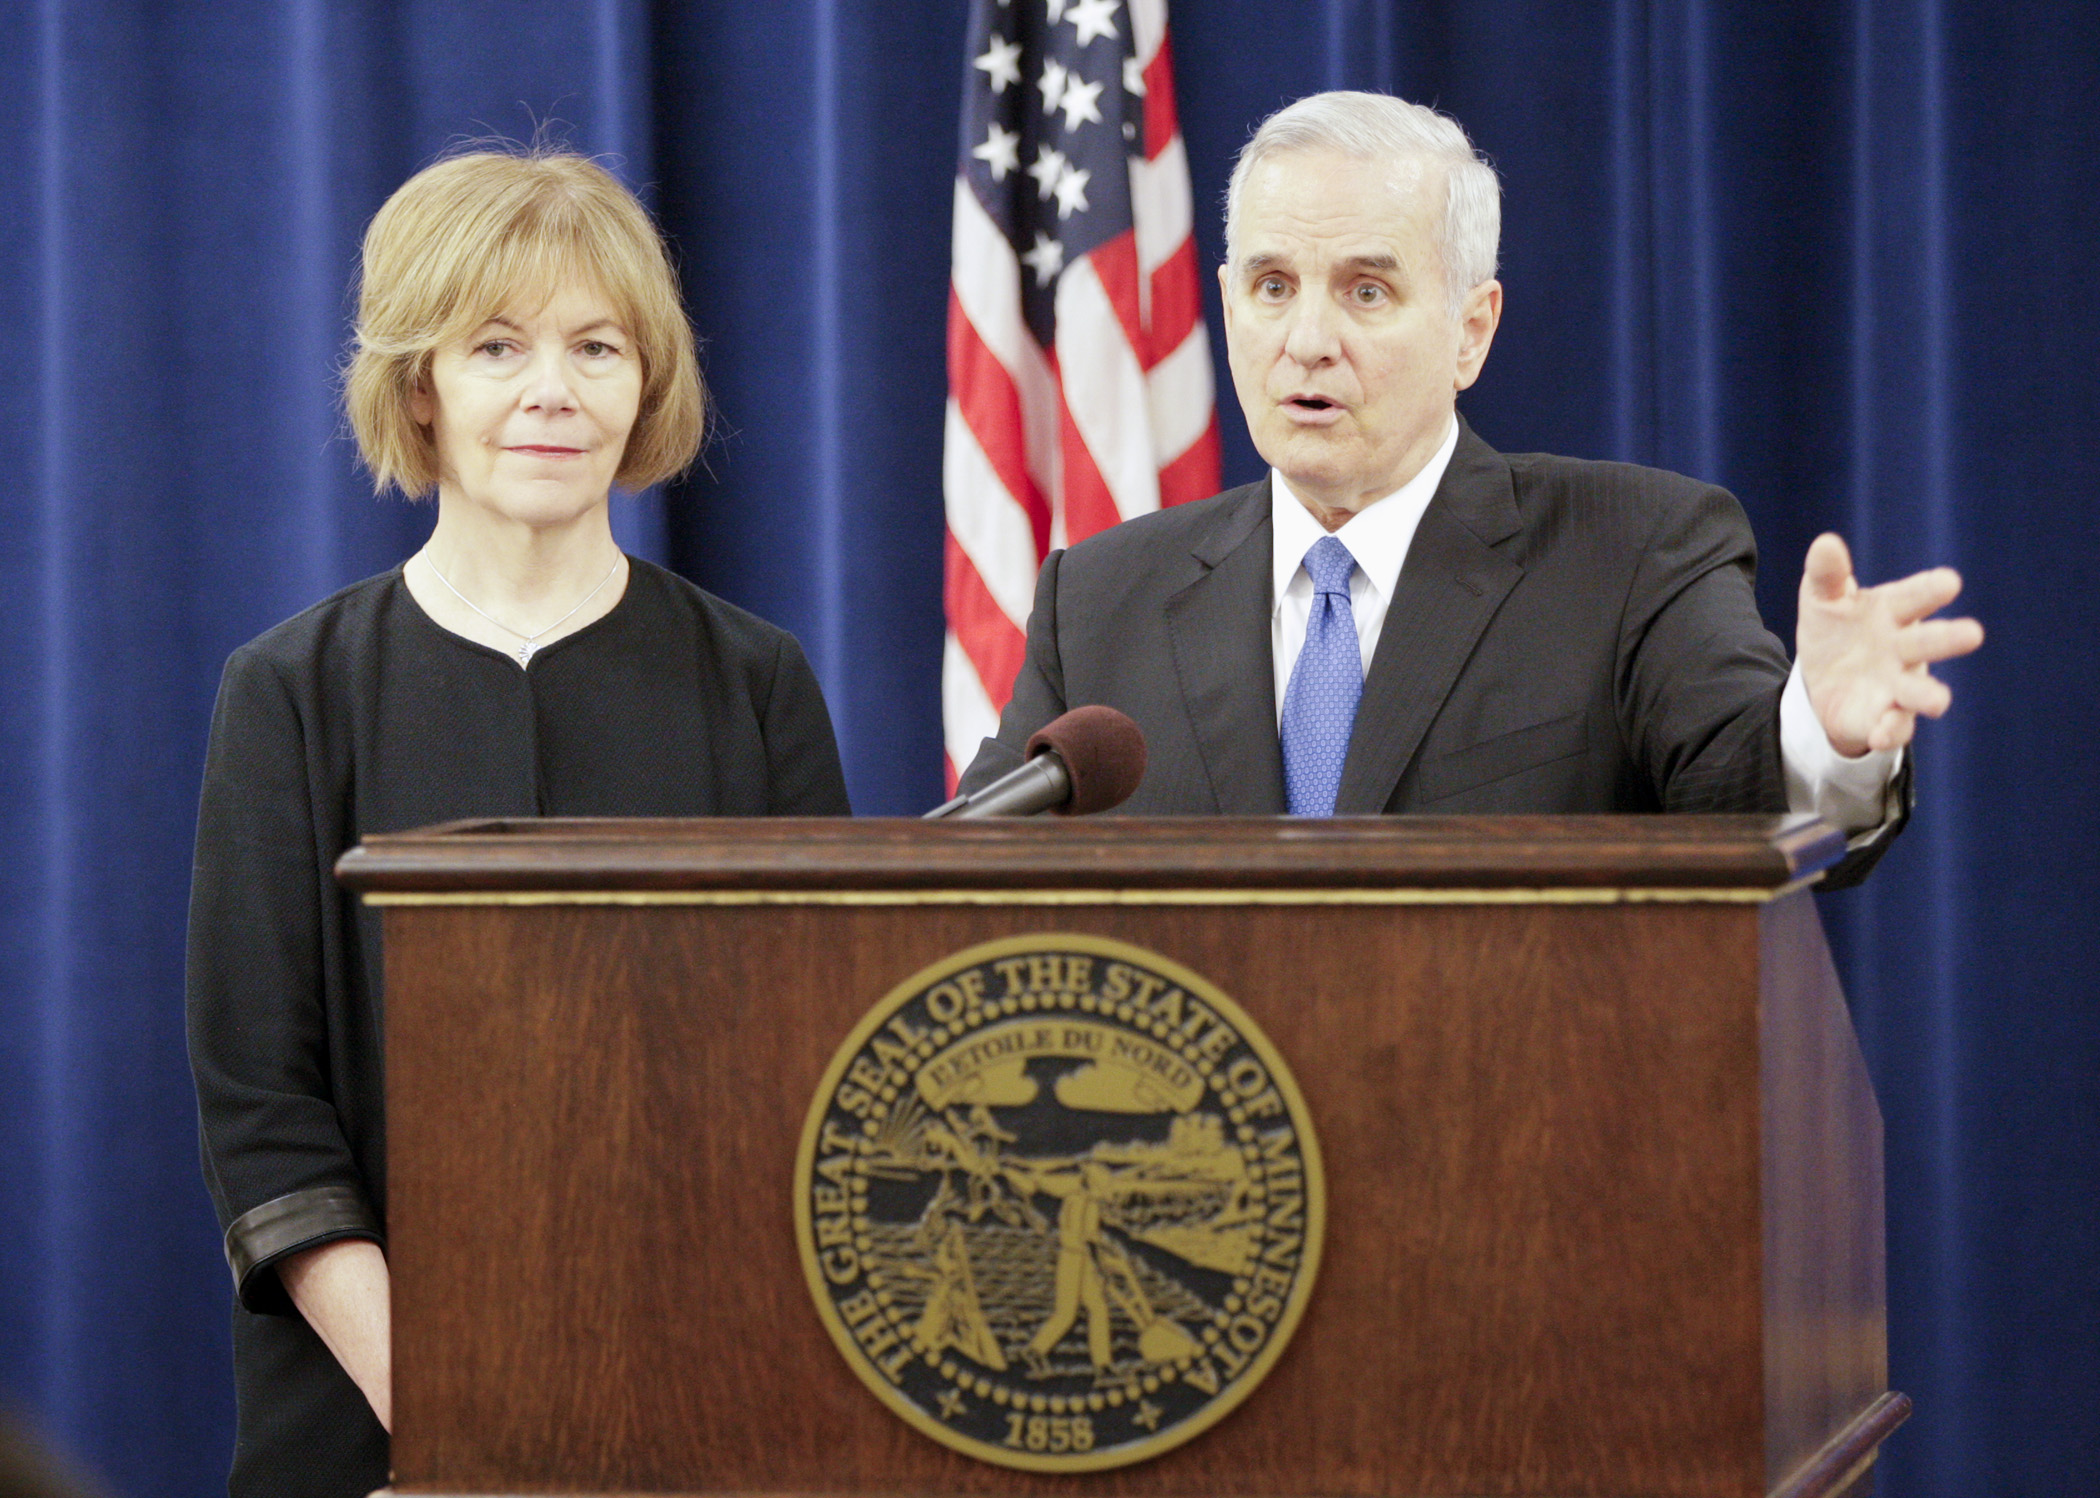 Gov. Mark Dayton and Lt. Gov. Tina Smith answer questions at a May 16 press conference where he expressed his displeasure with the funding level agreed upon by legislative leaders the day before. He threatened to veto the E-12 education funding bill if an a